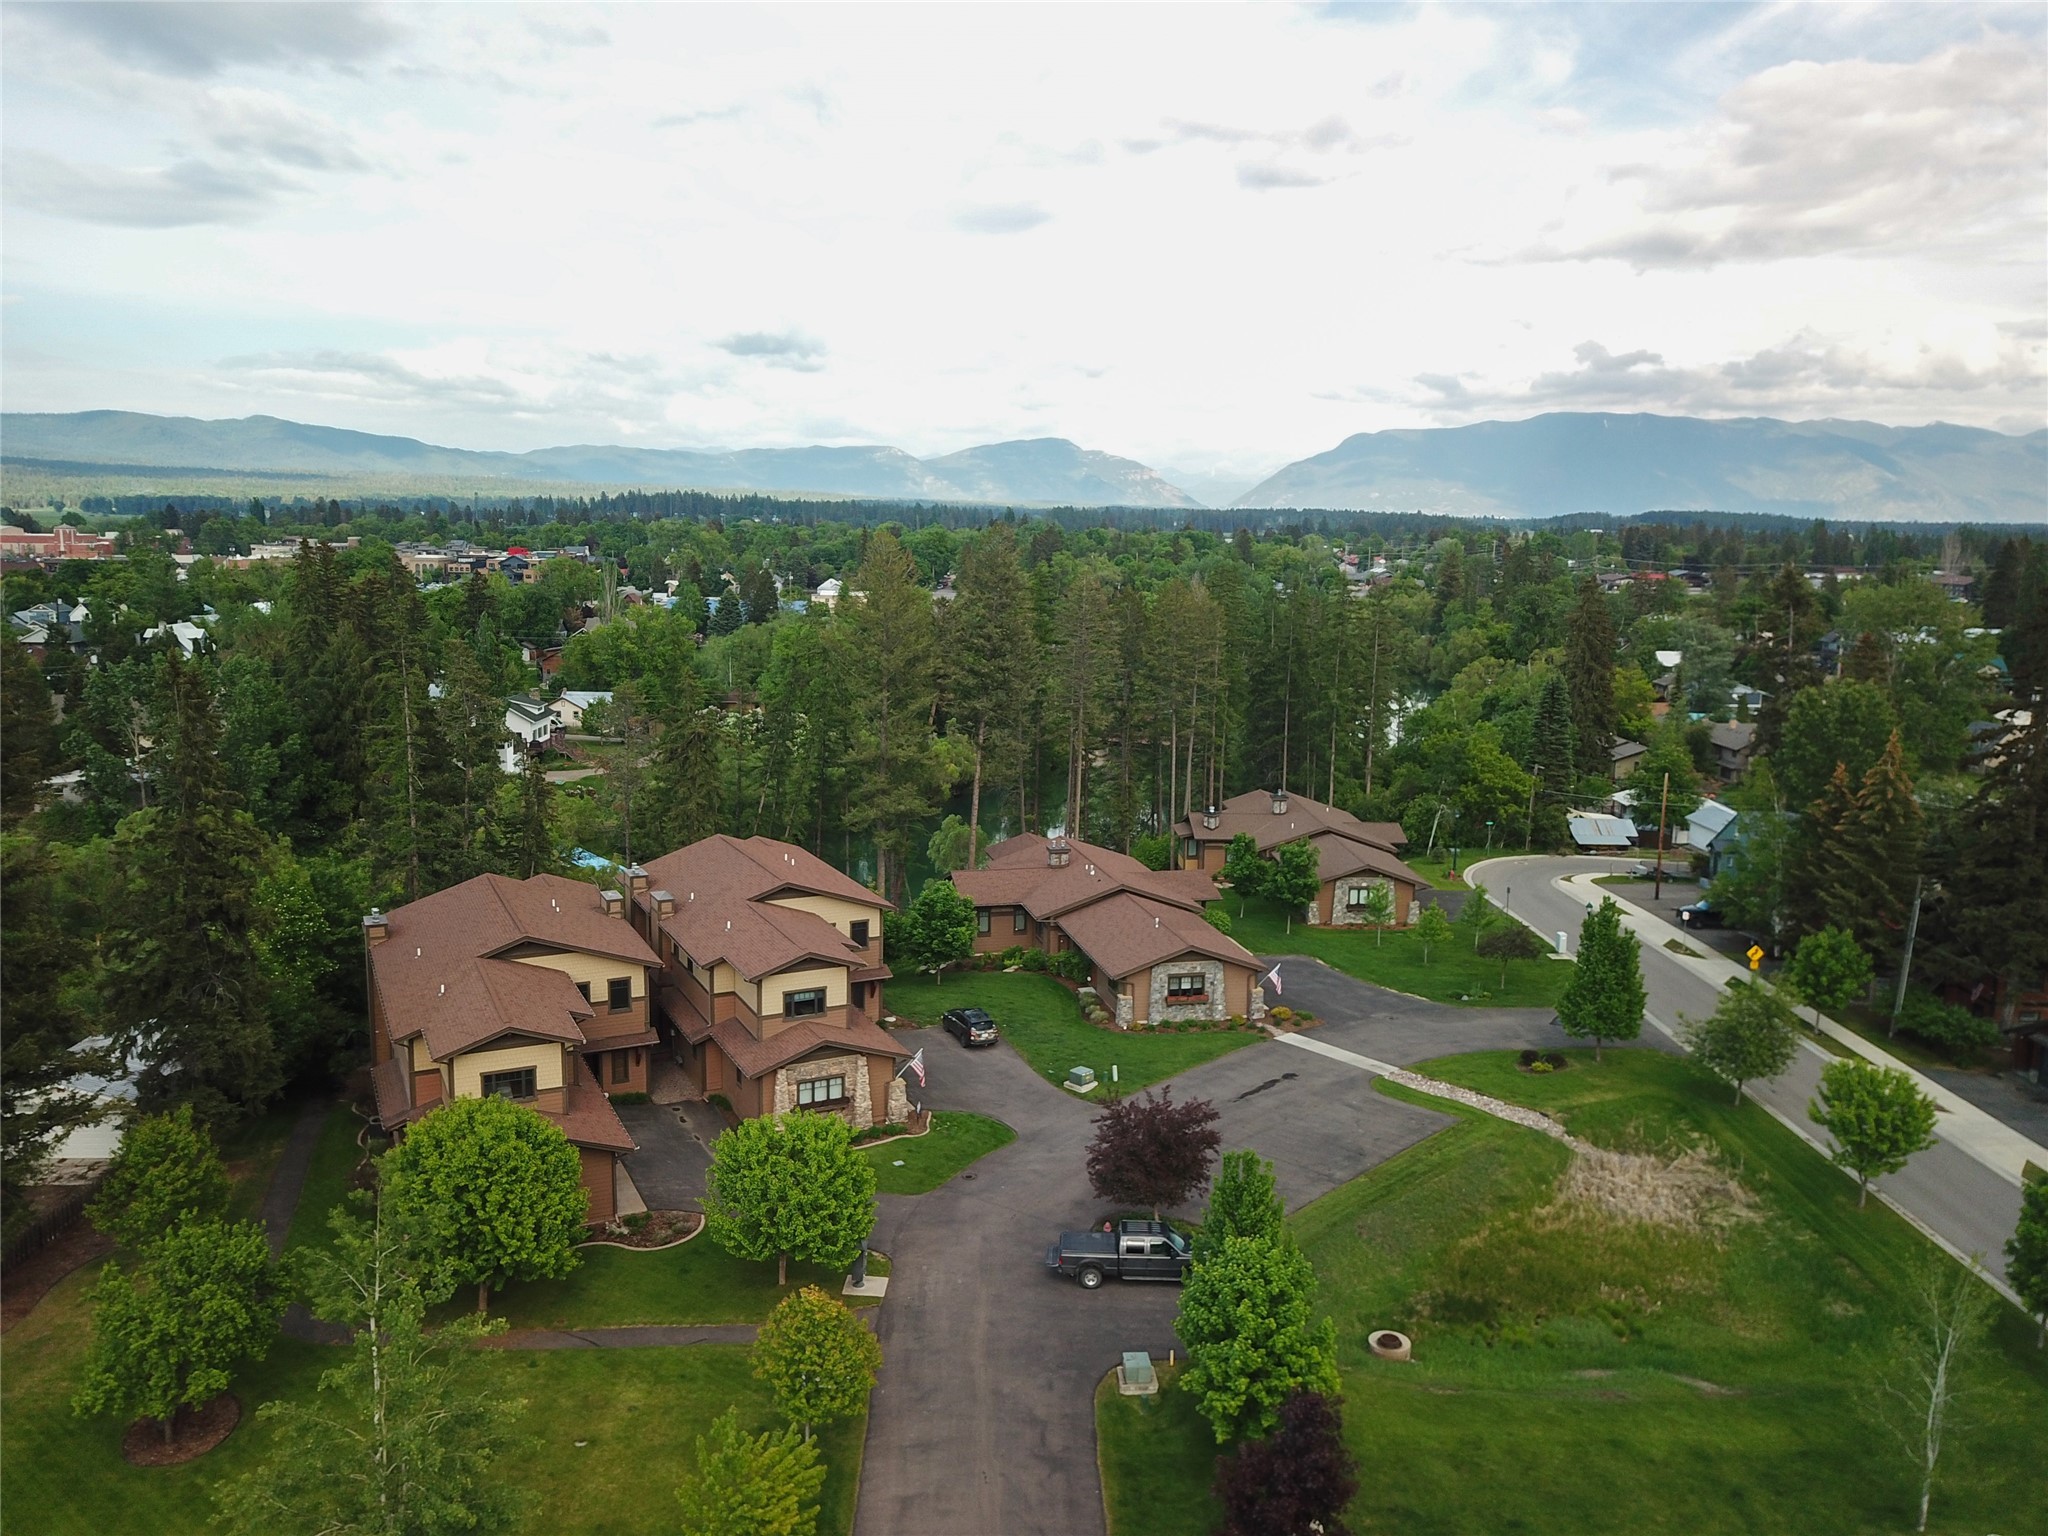 Custom and Furnished Whitefish River Access 3BR / 4BA condo in the sought after River Crossing community.  This unit is private and on the end corner of the development.  High end and Hardwood finishes throughout with the Master Bedroom on the main level.  Several outside decks with easy access looking over the river with excellent views of town, The Whitefish Range and ski area.  The location doesn't get better than this with easy river access and the Whitefish Trail System, dock and close to everything the quaint town of Whitefish has to offer.  Call Dave Gawe at (406) 212-8776 or your real estate professional for more information.